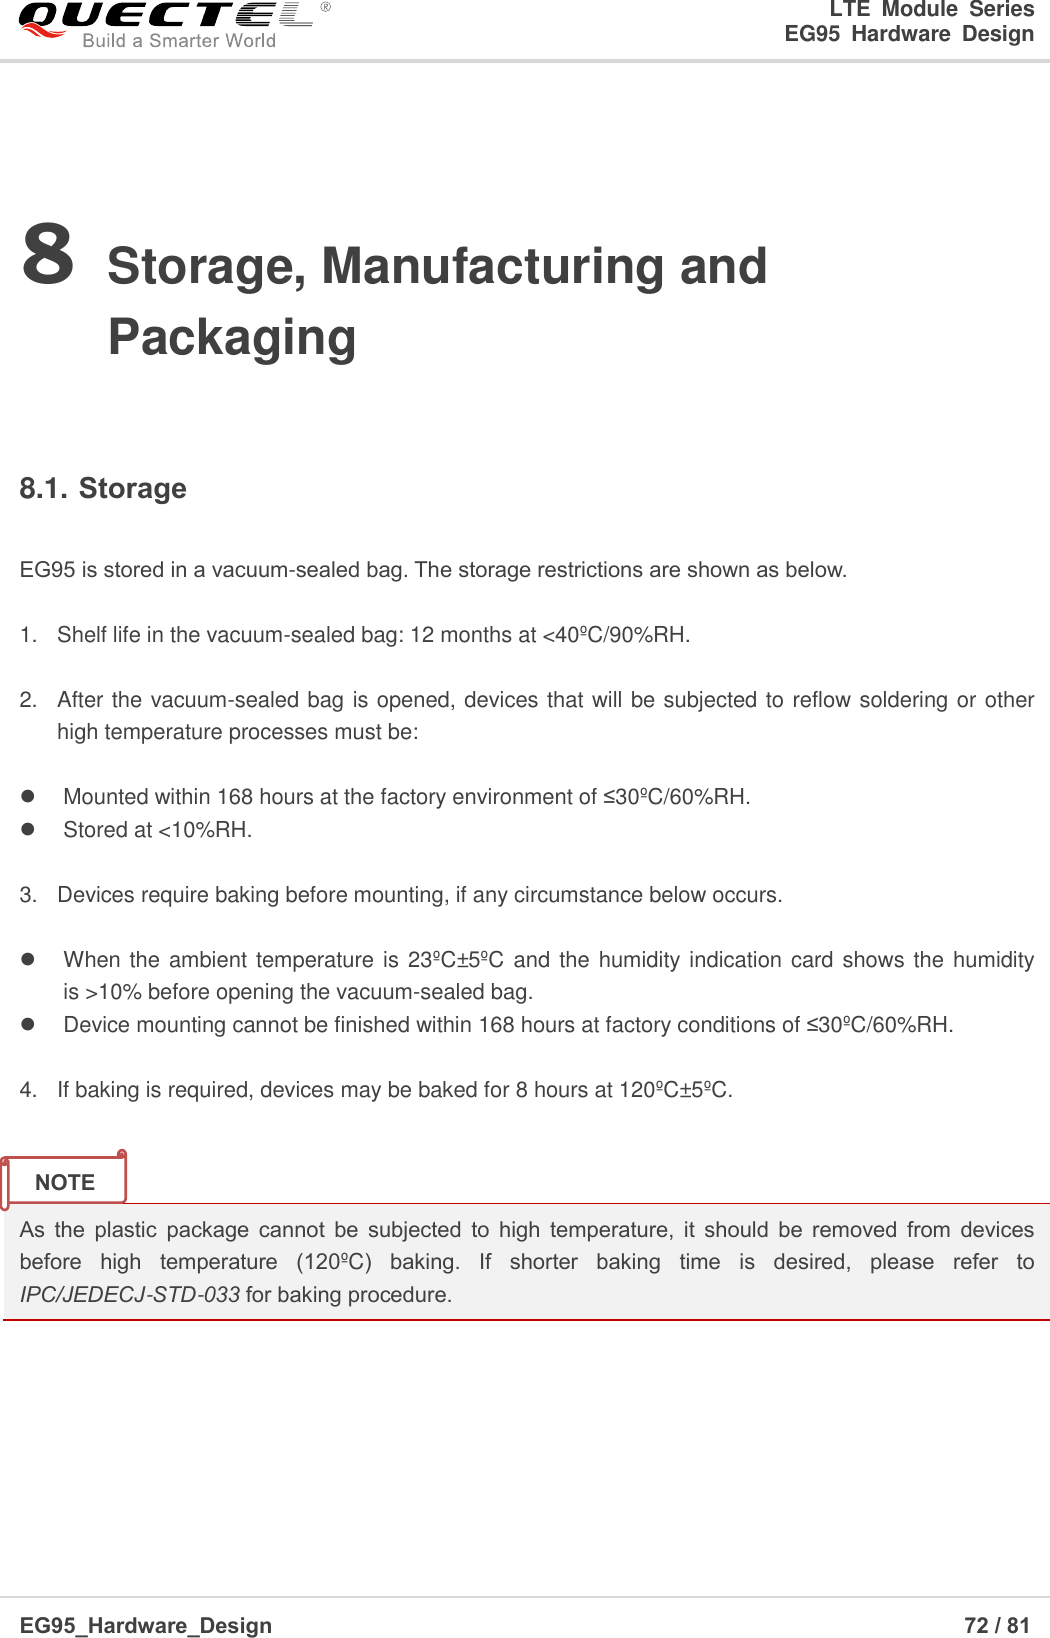 LTE  Module  Series                                                  EG95  Hardware  Design  EG95_Hardware_Design                                                                   72 / 81    8 Storage, Manufacturing and Packaging  8.1. Storage  EG95 is stored in a vacuum-sealed bag. The storage restrictions are shown as below.    1.  Shelf life in the vacuum-sealed bag: 12 months at &lt;40ºC/90%RH.  2.  After the vacuum-sealed bag is opened, devices that will be subjected to reflow soldering or other high temperature processes must be:      Mounted within 168 hours at the factory environment of ≤30ºC/60%RH.   Stored at &lt;10%RH.  3.  Devices require baking before mounting, if any circumstance below occurs.    When the ambient temperature is 23ºC±5ºC and the humidity indication card shows the humidity is &gt;10% before opening the vacuum-sealed bag.    Device mounting cannot be finished within 168 hours at factory conditions of ≤30ºC/60%RH.  4.  If baking is required, devices may be baked for 8 hours at 120ºC±5ºC.   As  the  plastic  package  cannot  be  subjected  to  high  temperature,  it  should  be  removed  from  devices before  high  temperature  (120ºC )  baking.  If  shorter  baking  time  is  desired,  please  refer  to IPC/JEDECJ-STD-033 for baking procedure.    NOTE 